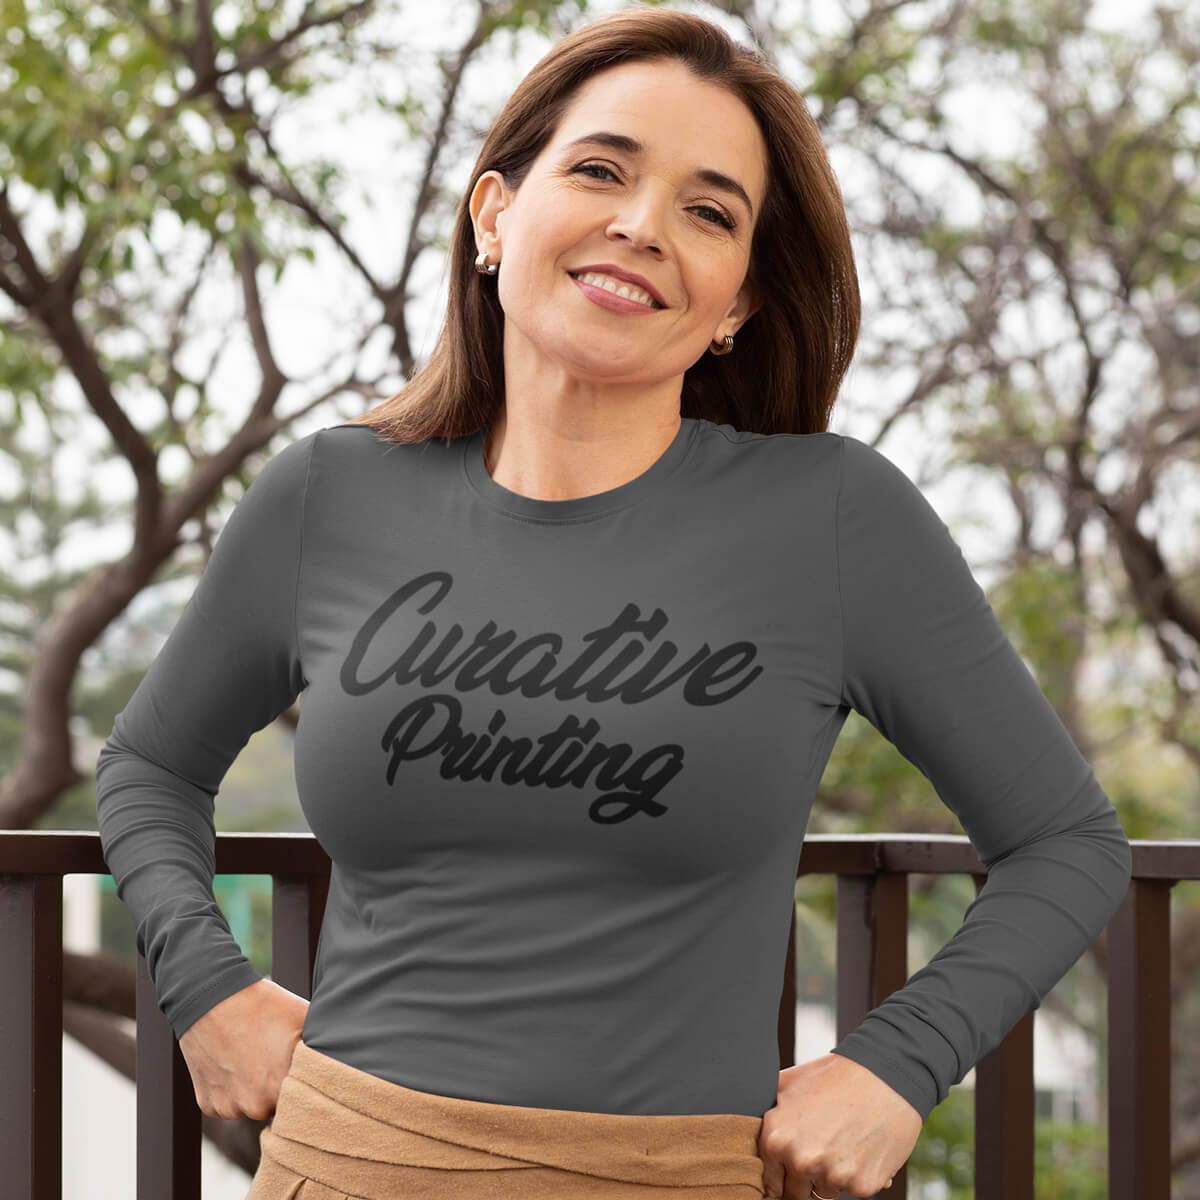 Happy woman standing outside wearing a grey long sleeve t-shirt tee with black curative printing logo imprint